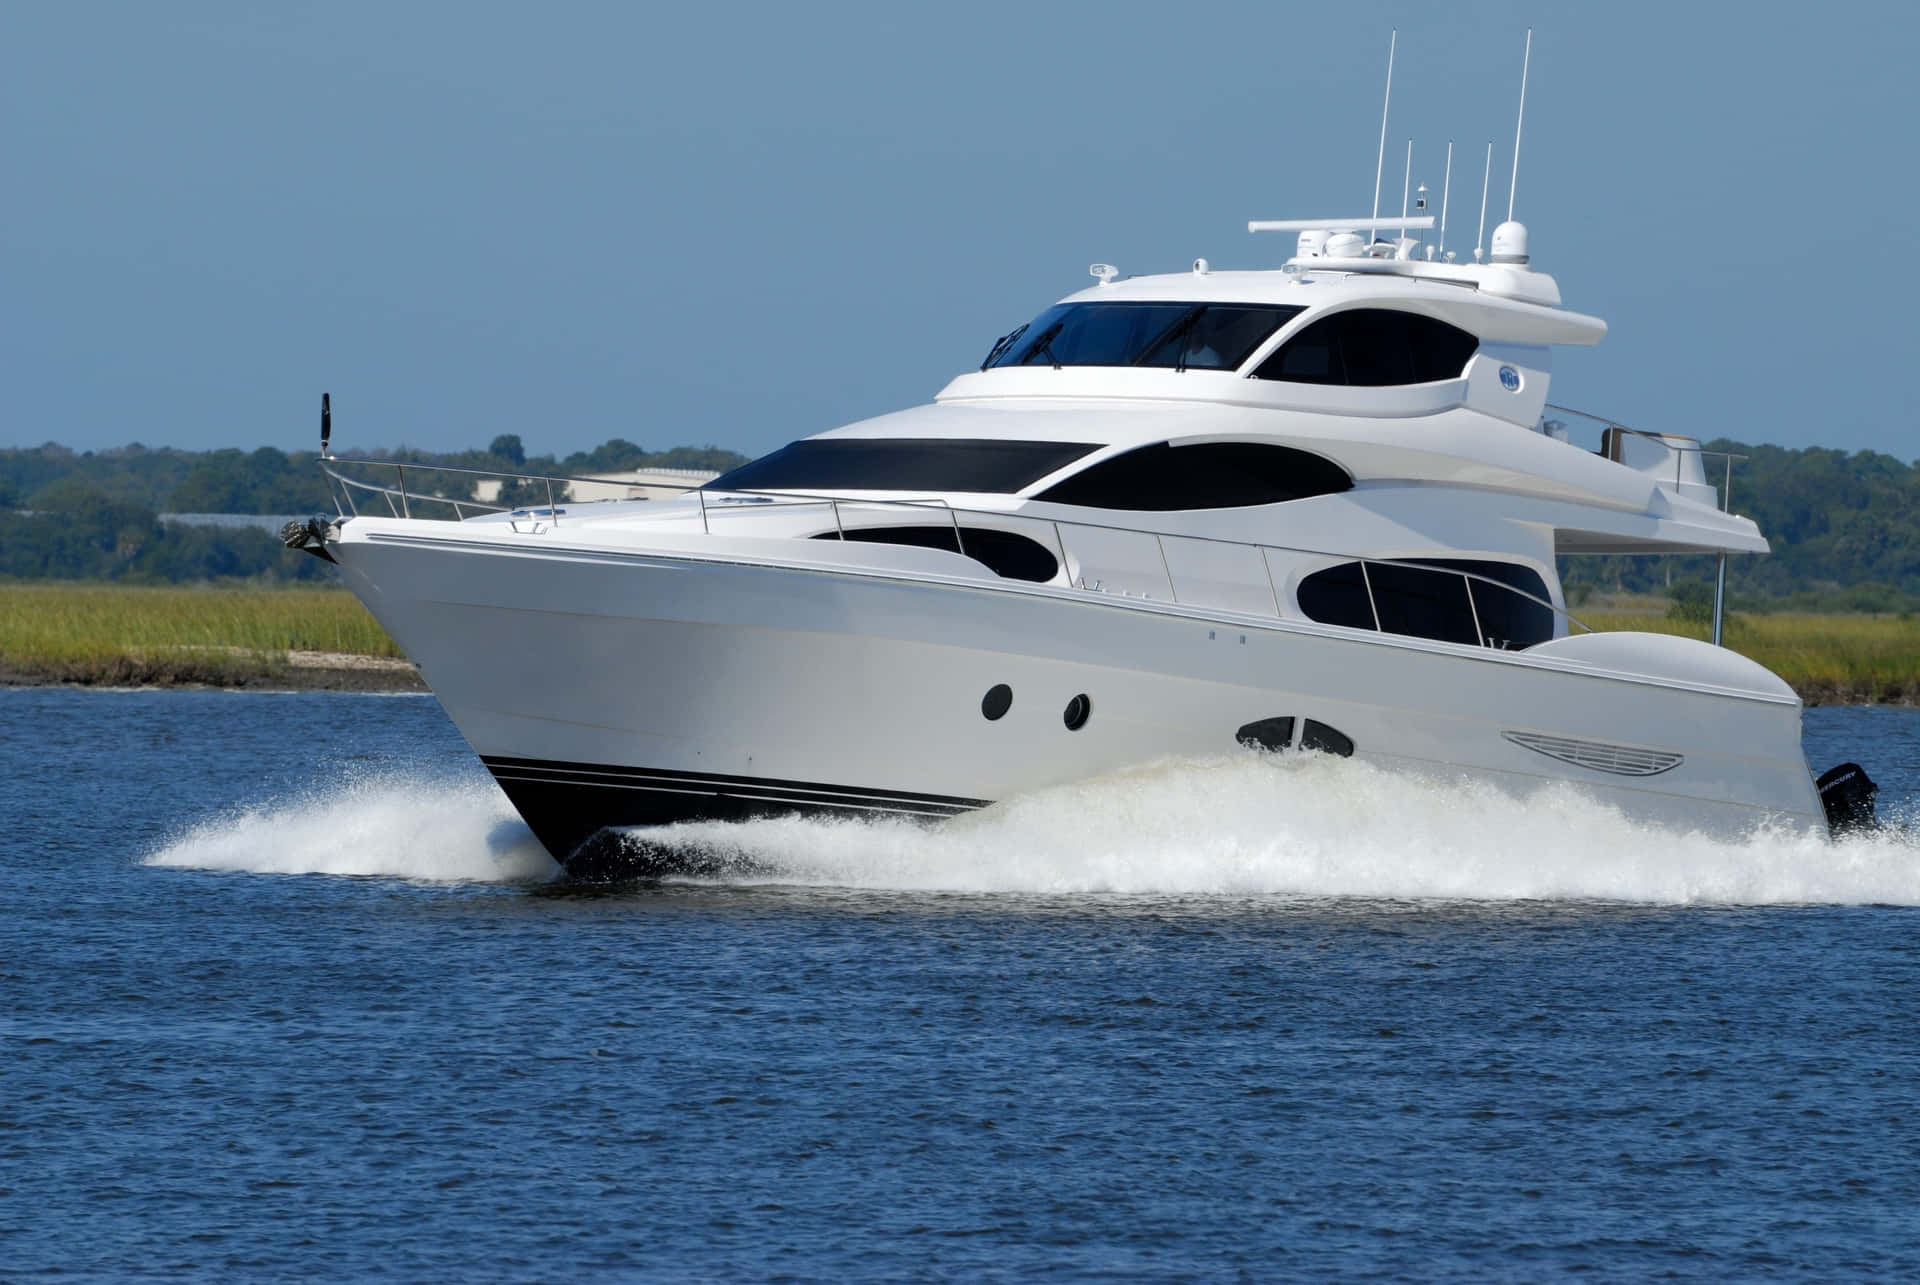 A White Motor Yacht Is Traveling Through The Water